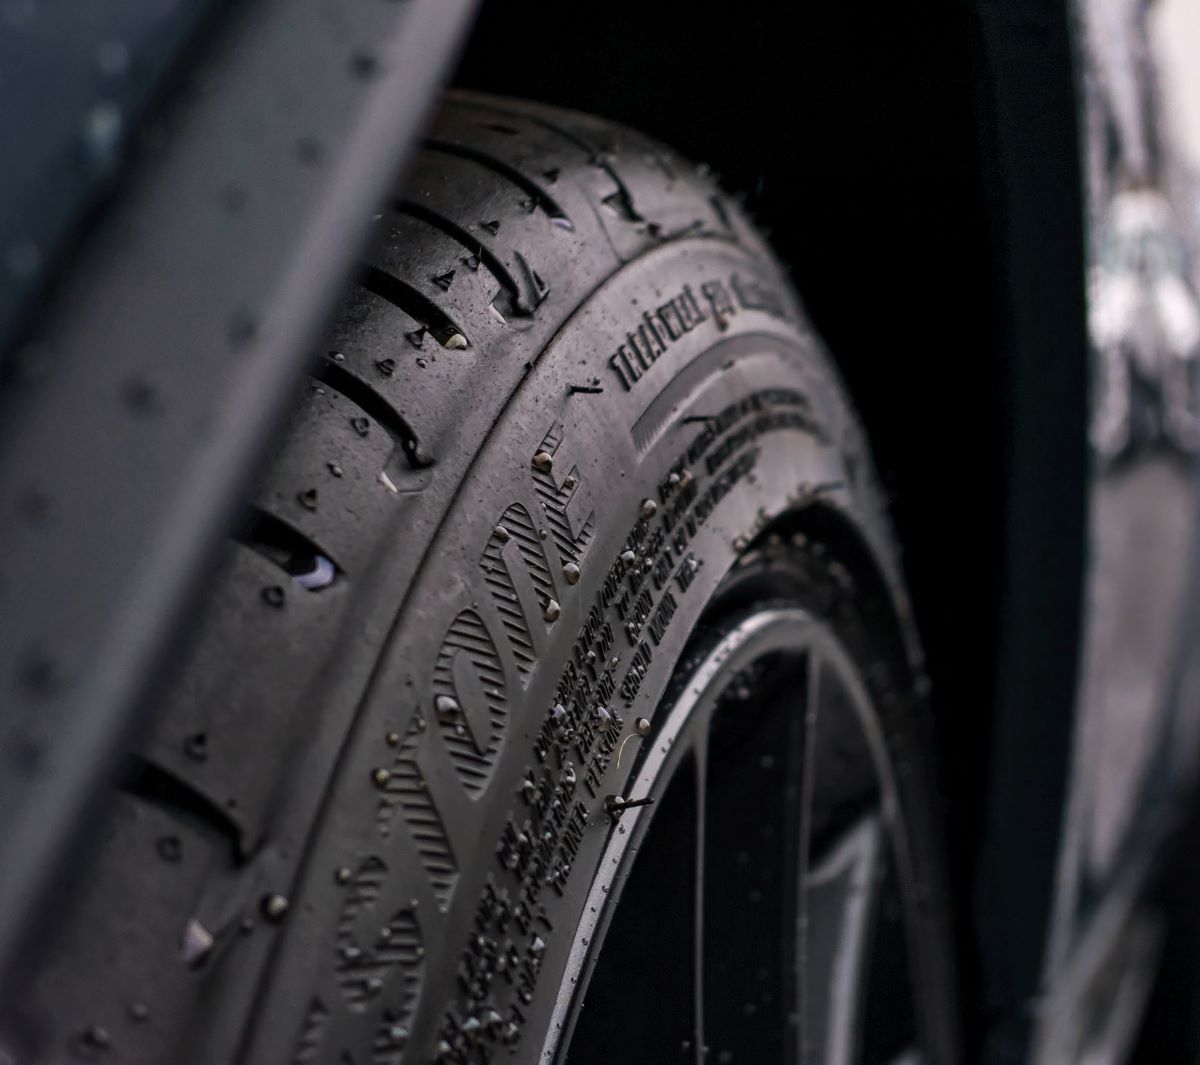 Close-up of a car tire; car tire pressure should be neither too high nor too low